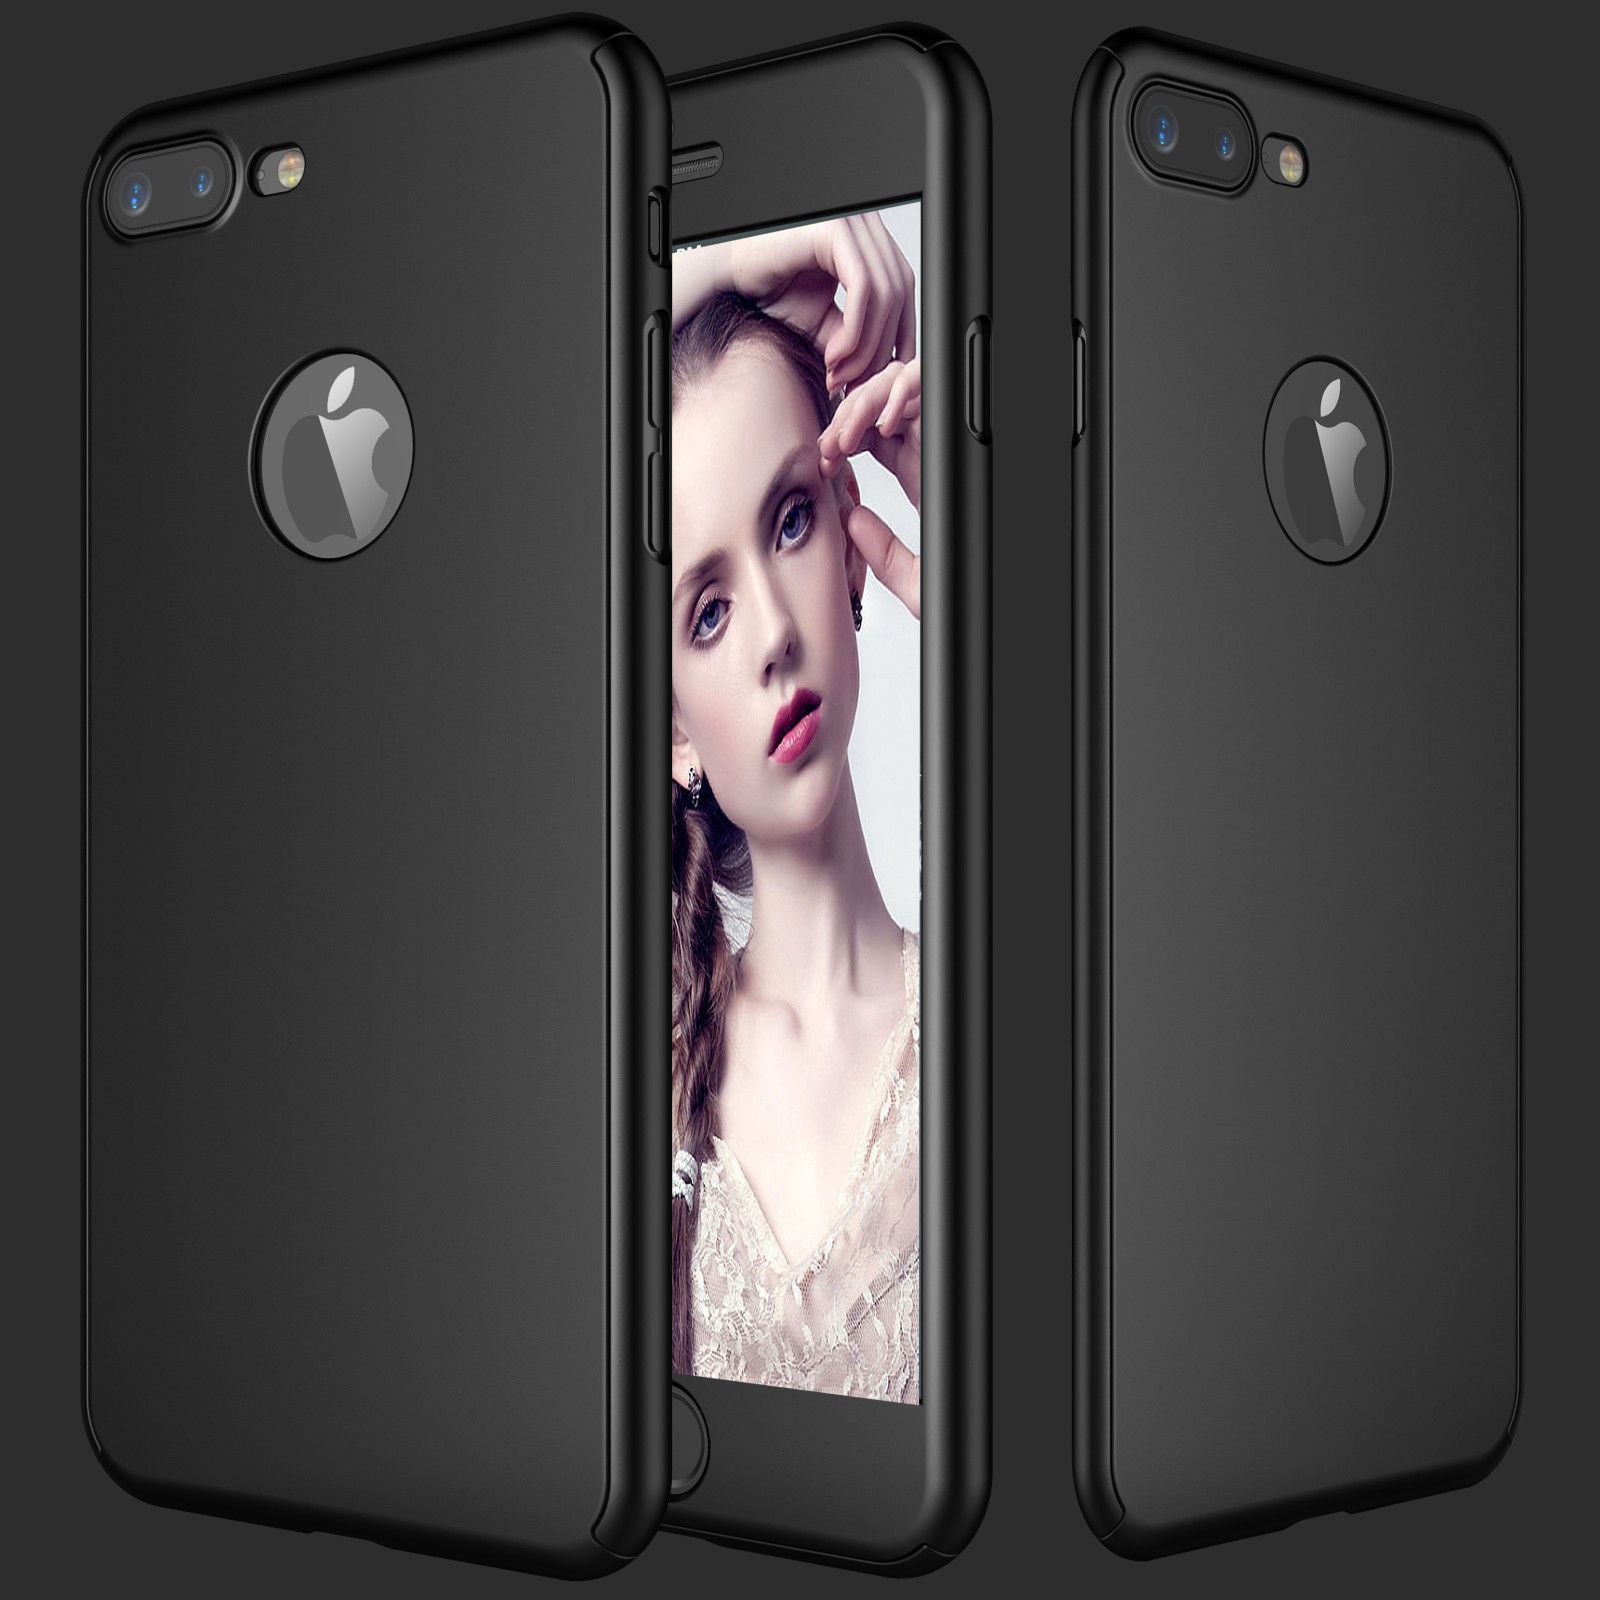 360° Full-Wrap Thin Fit For iPhone 6 / 6s Models iPhone Cases AtlasBling Jet Black iPhone 6 / 6s 